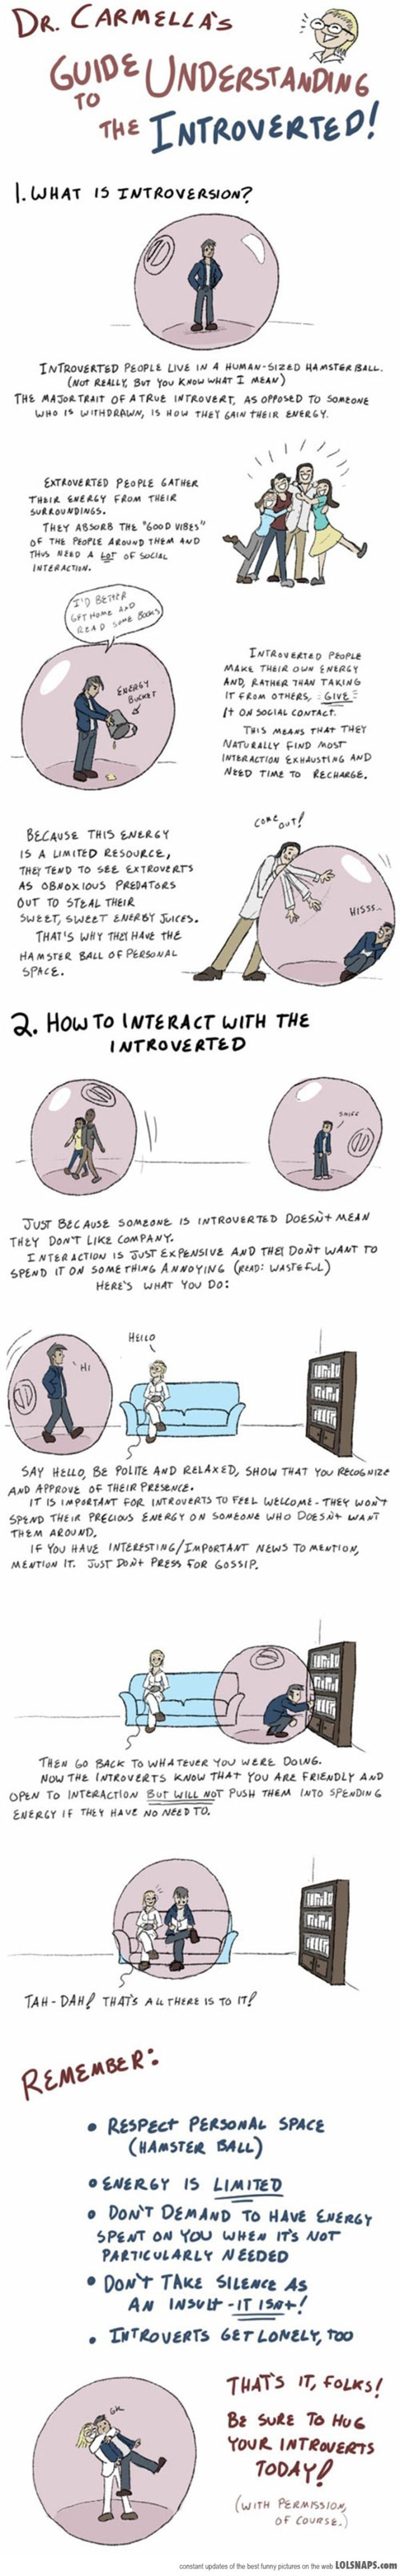 How To Deal With Introverts